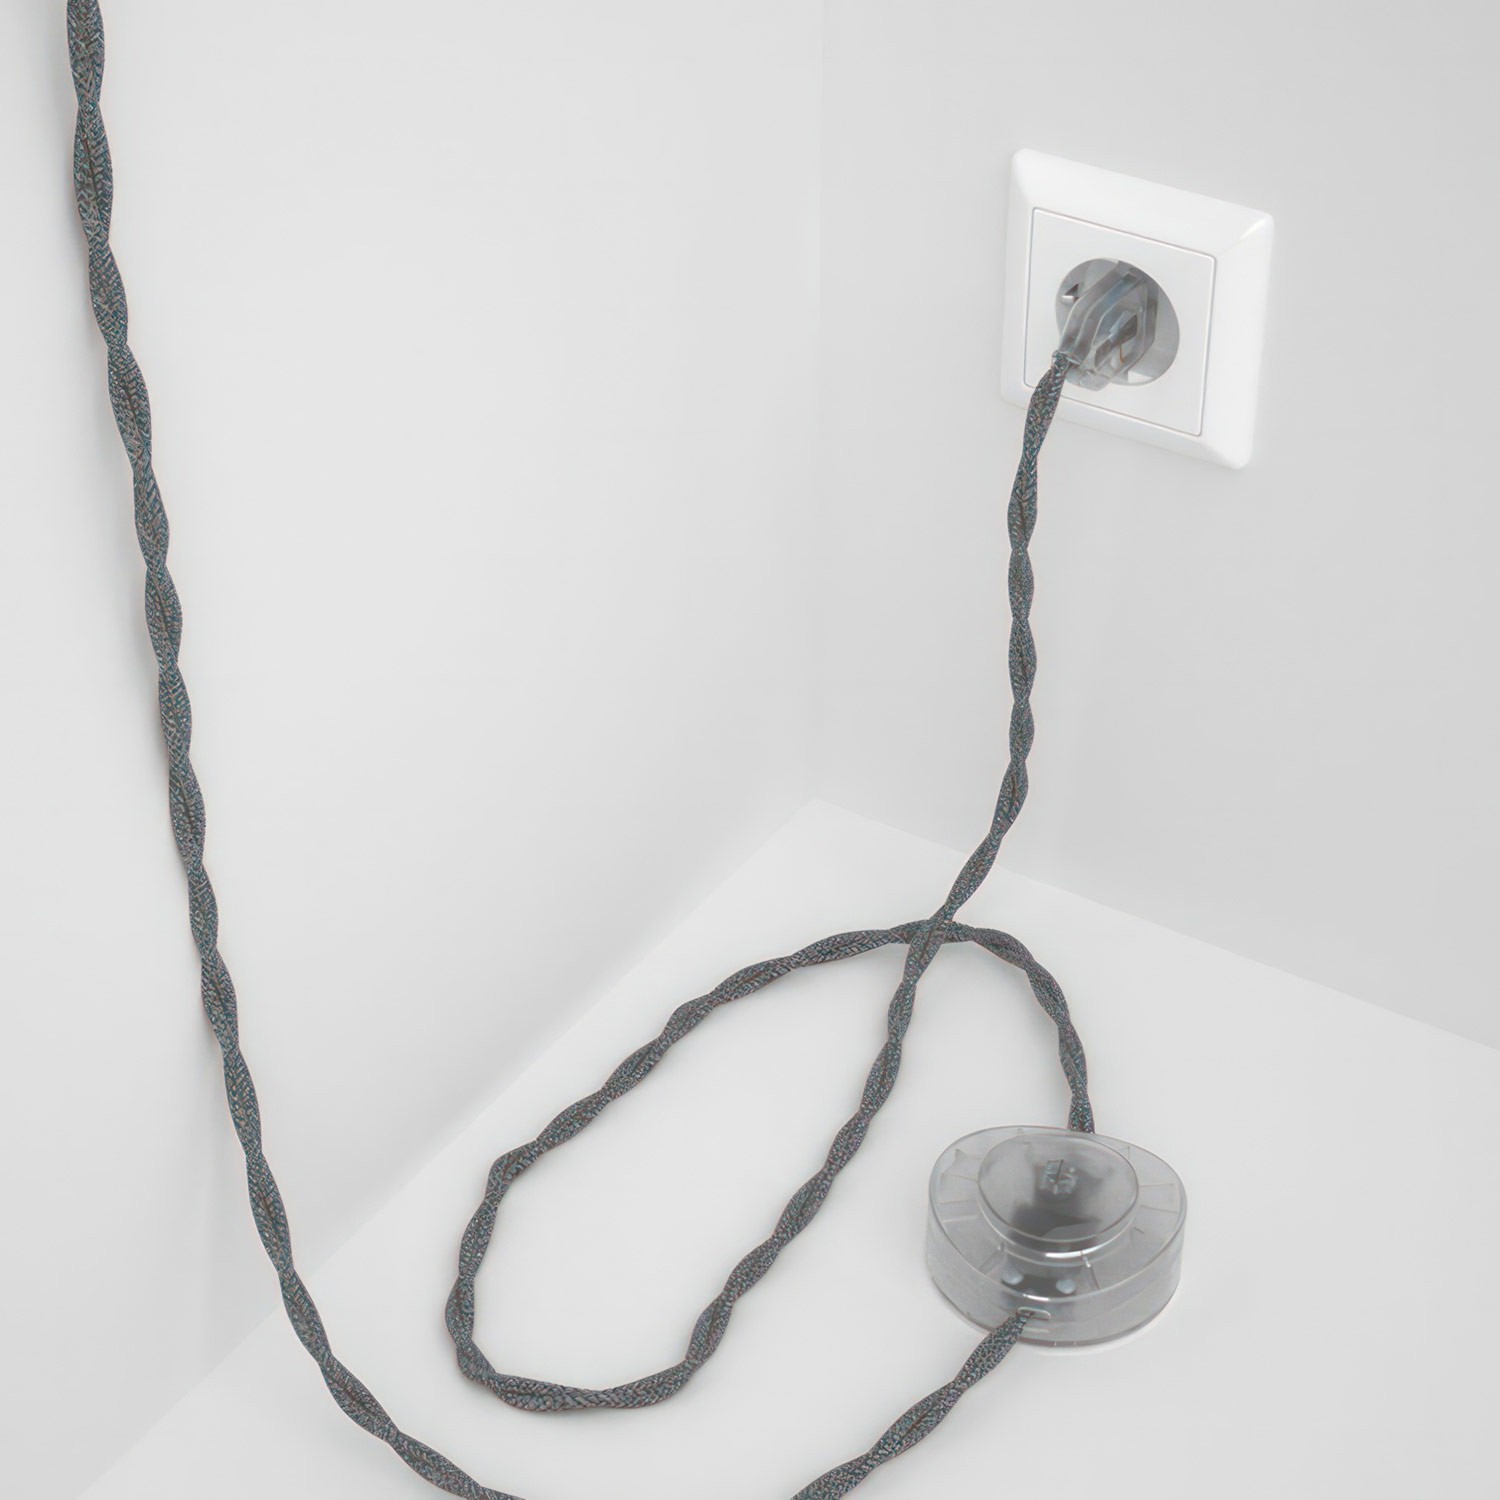 Wiring Pedestal, TN02 Grey Natural Linen 3 m. Choose the colour of the switch and plug.